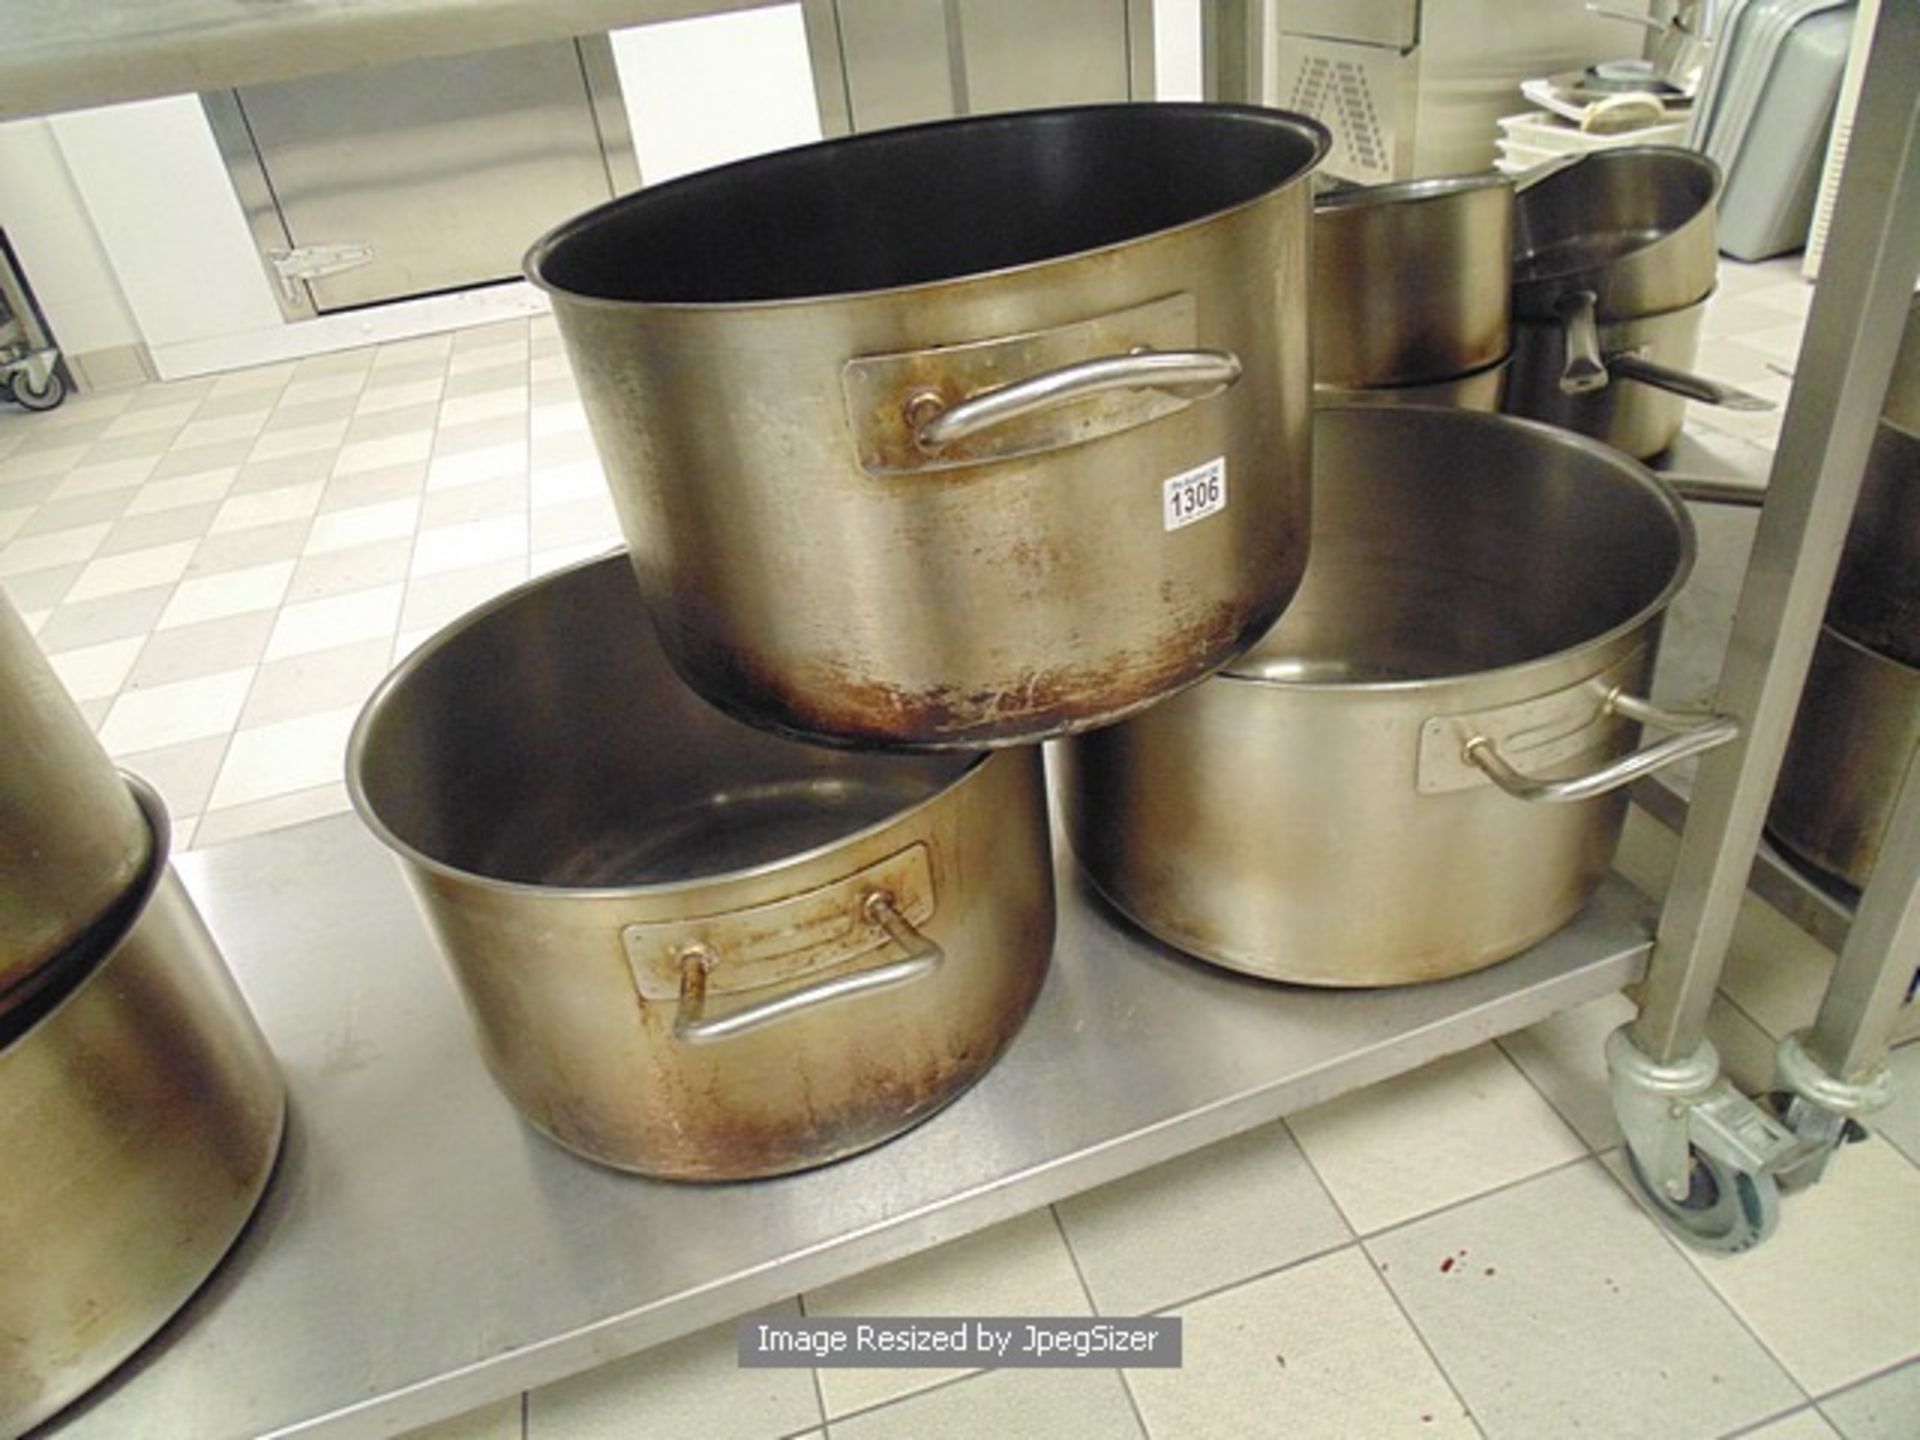 3 x Lagor stainless steel commercial stock pots 34 litre capacity 420mm x 250mmm